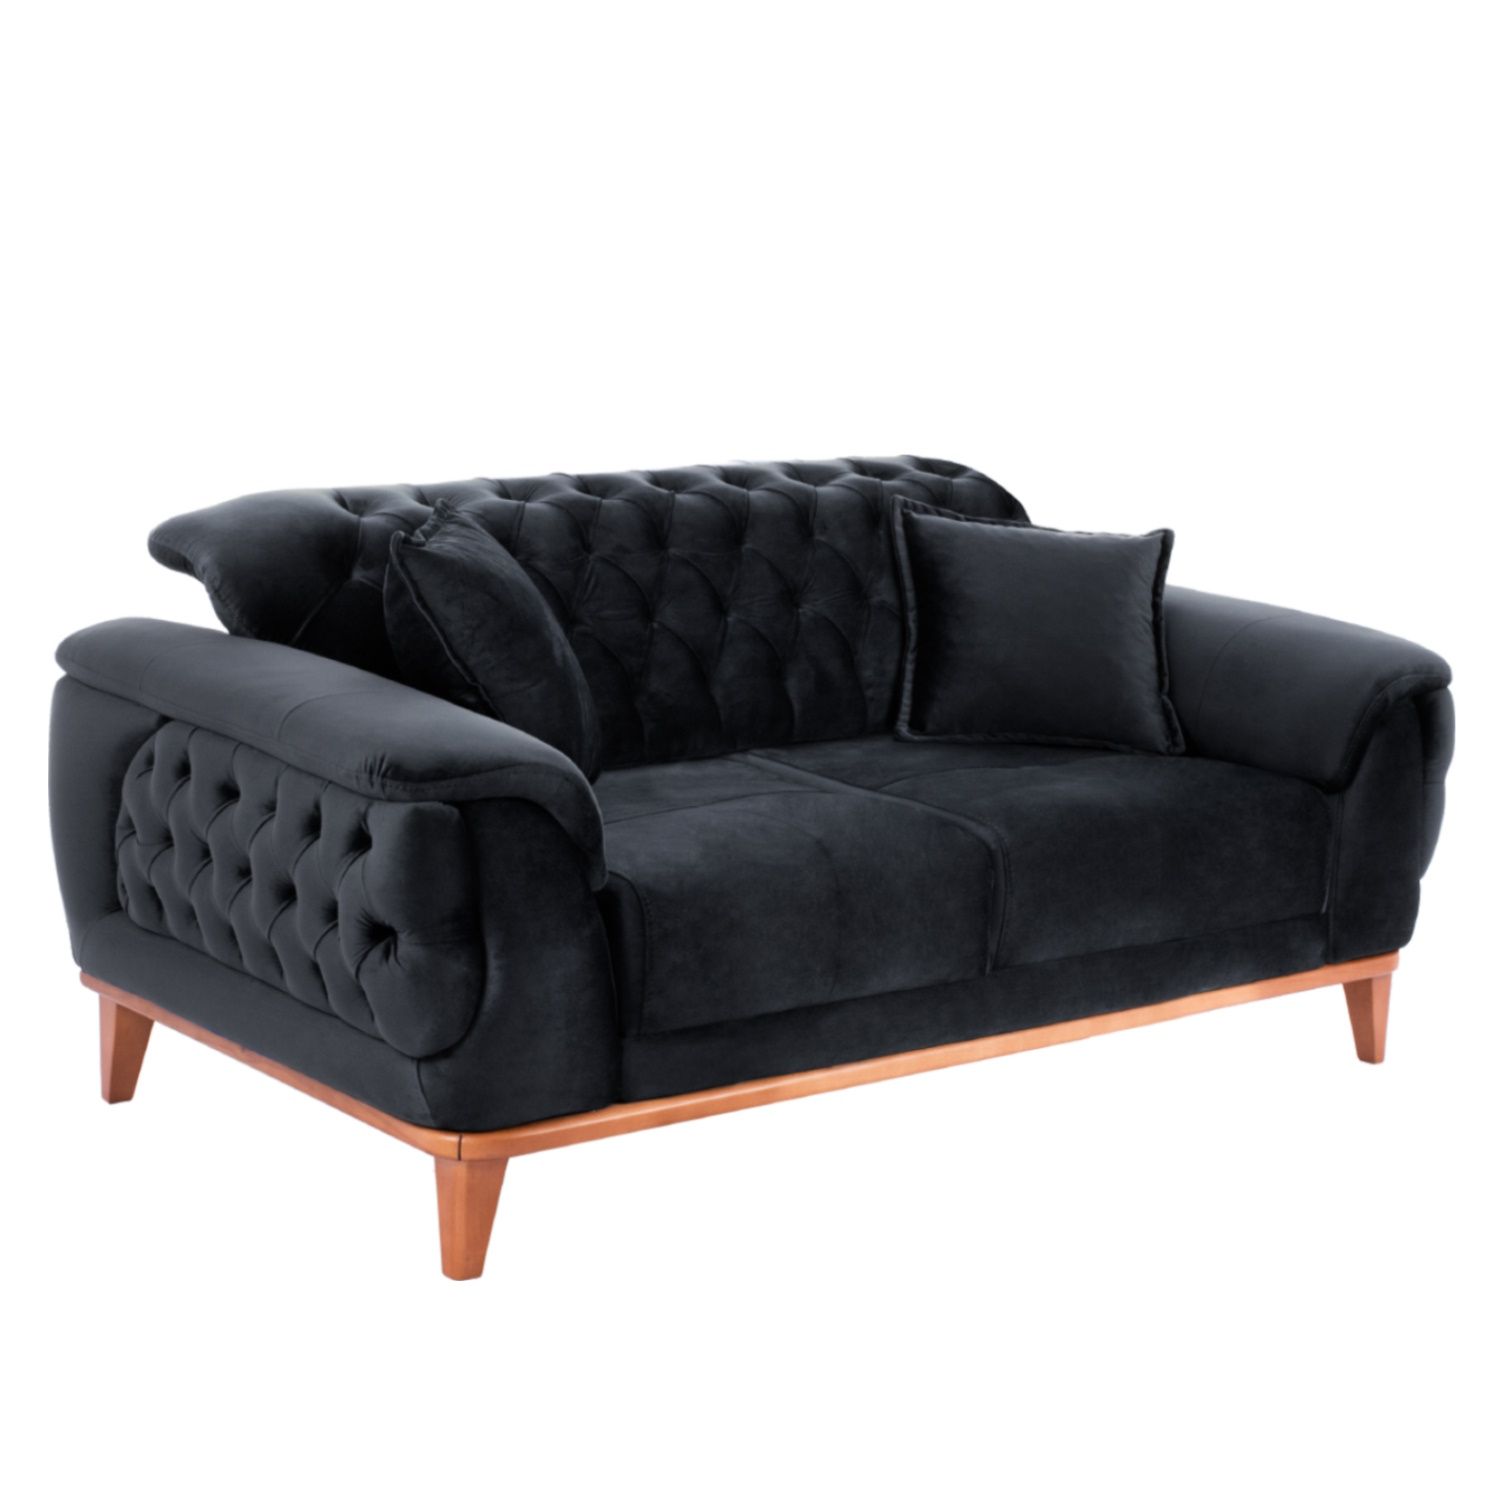 Buy Furniture Cheap ✓ Indoor & Outdoor Furniture ▷ For The Catering  Industry And Your Home ✚ Fast & Convenient ✚ Buy At The Best Price ➨ Save  Now! – 2 Seater Sofa Bed, Intended For Black Velvet 2 Seater Sofa Beds (View 2 of 15)